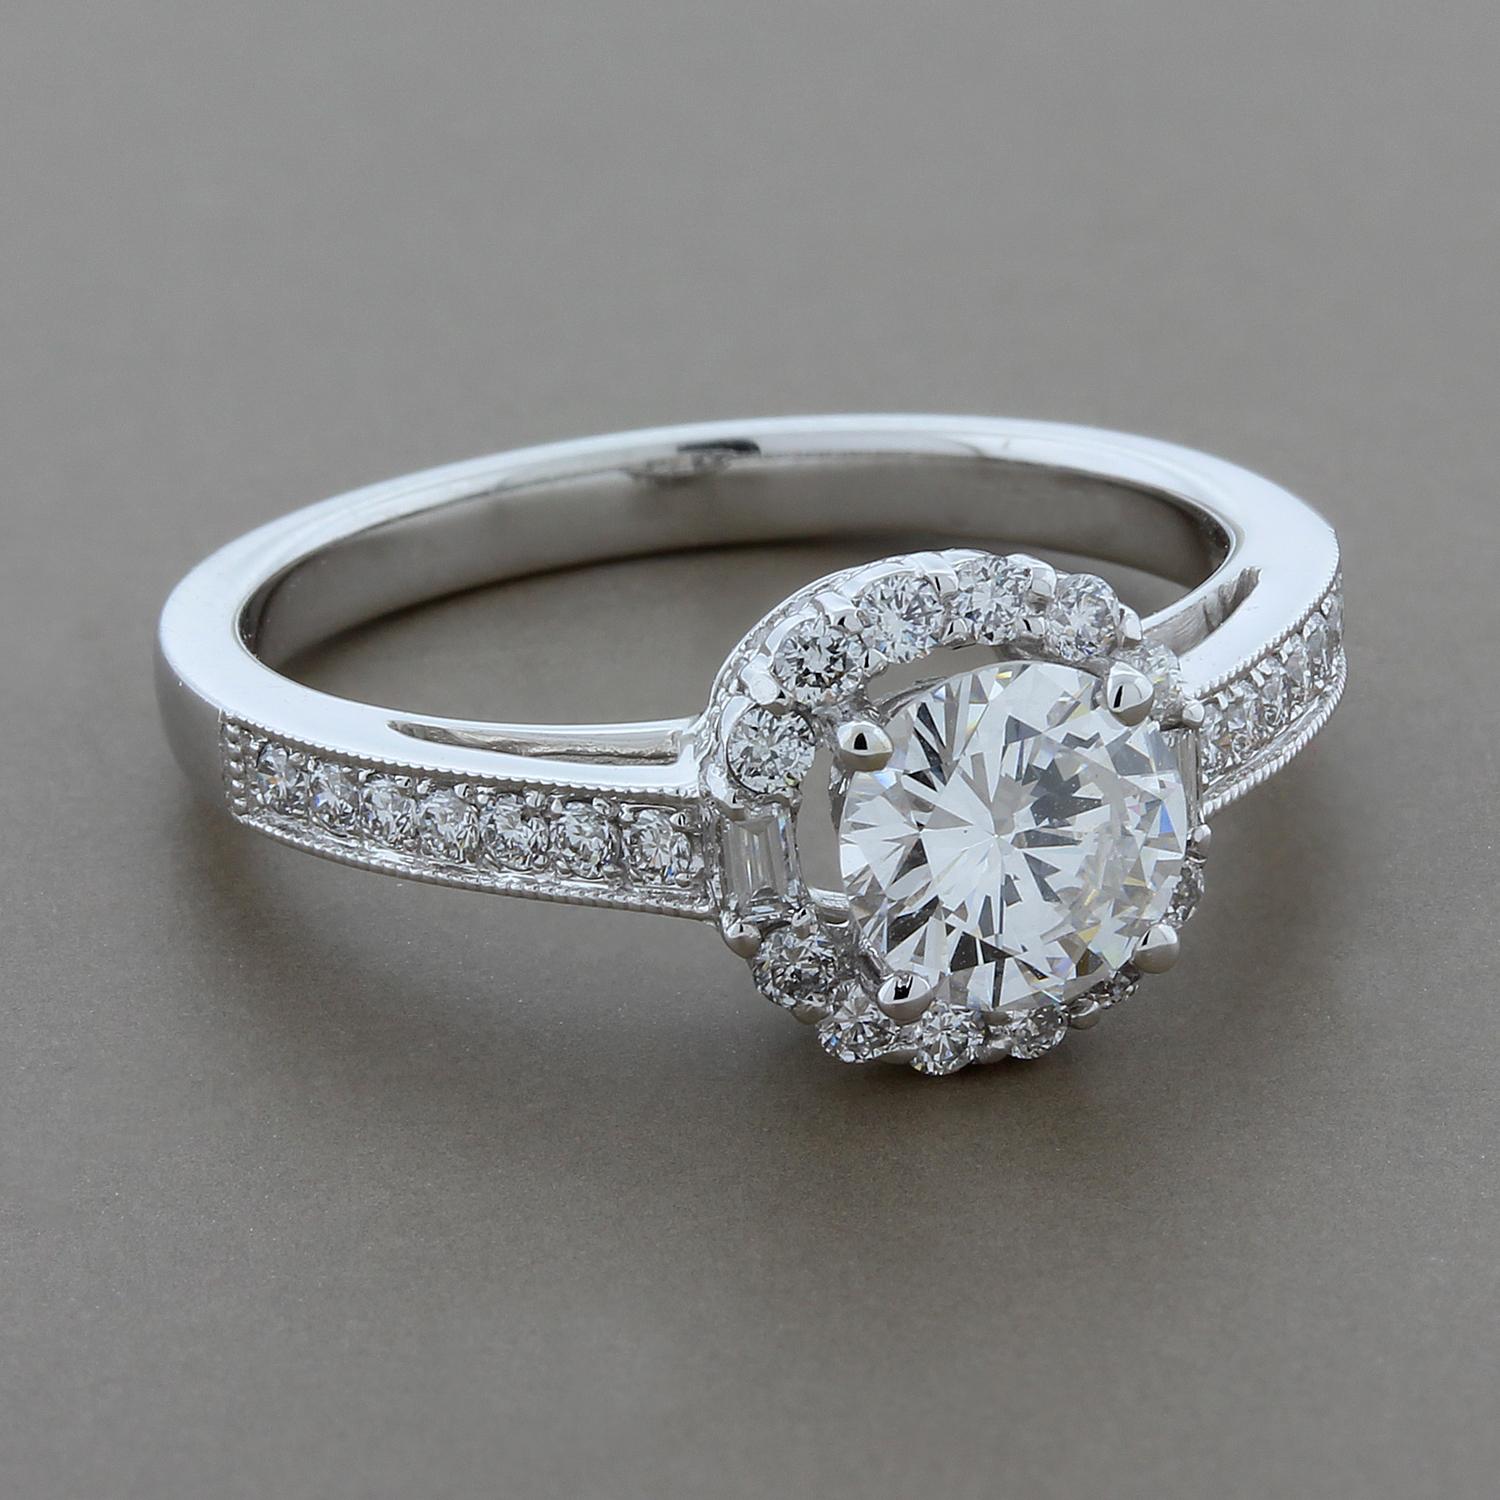 A sweet engagement ring featuring a round cut 0.71 carat diamond at the center.  The spectacularly bright white diamonds boast VS clarity and G color.  It is haloed by round cut and baguette cut diamonds in a special design set in 18K white